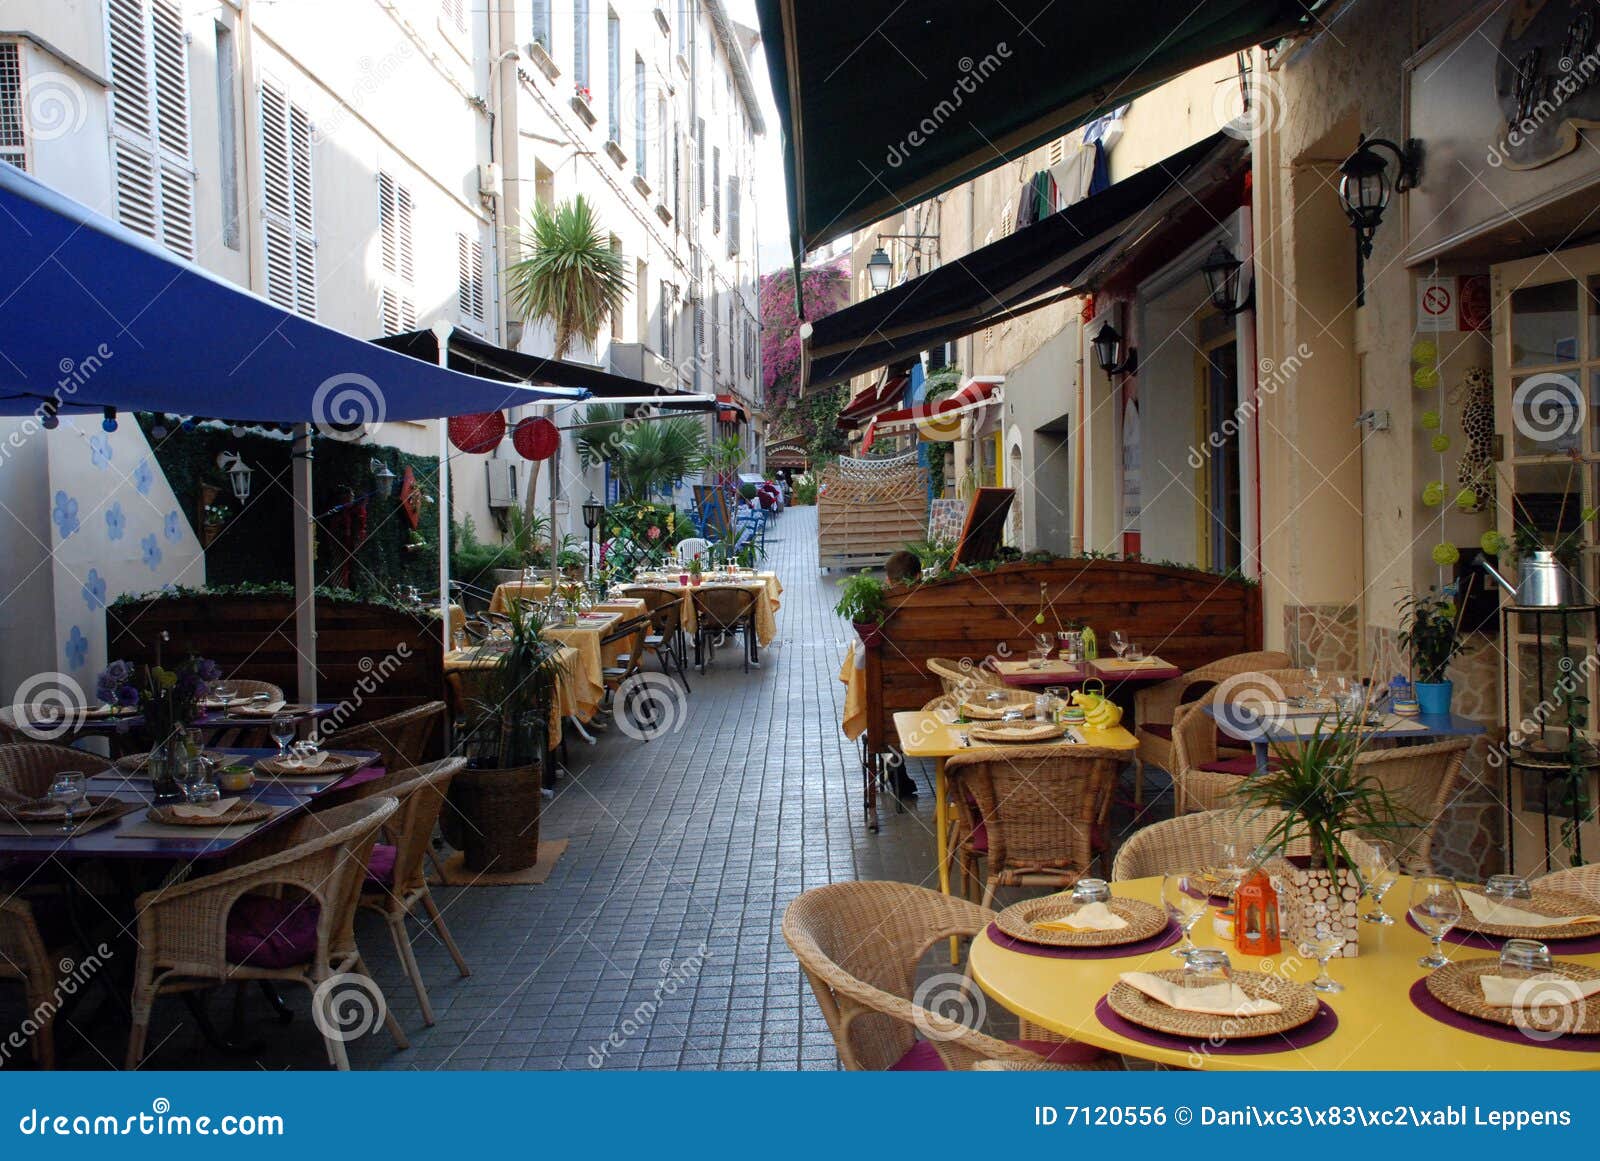 restaurants in the provence